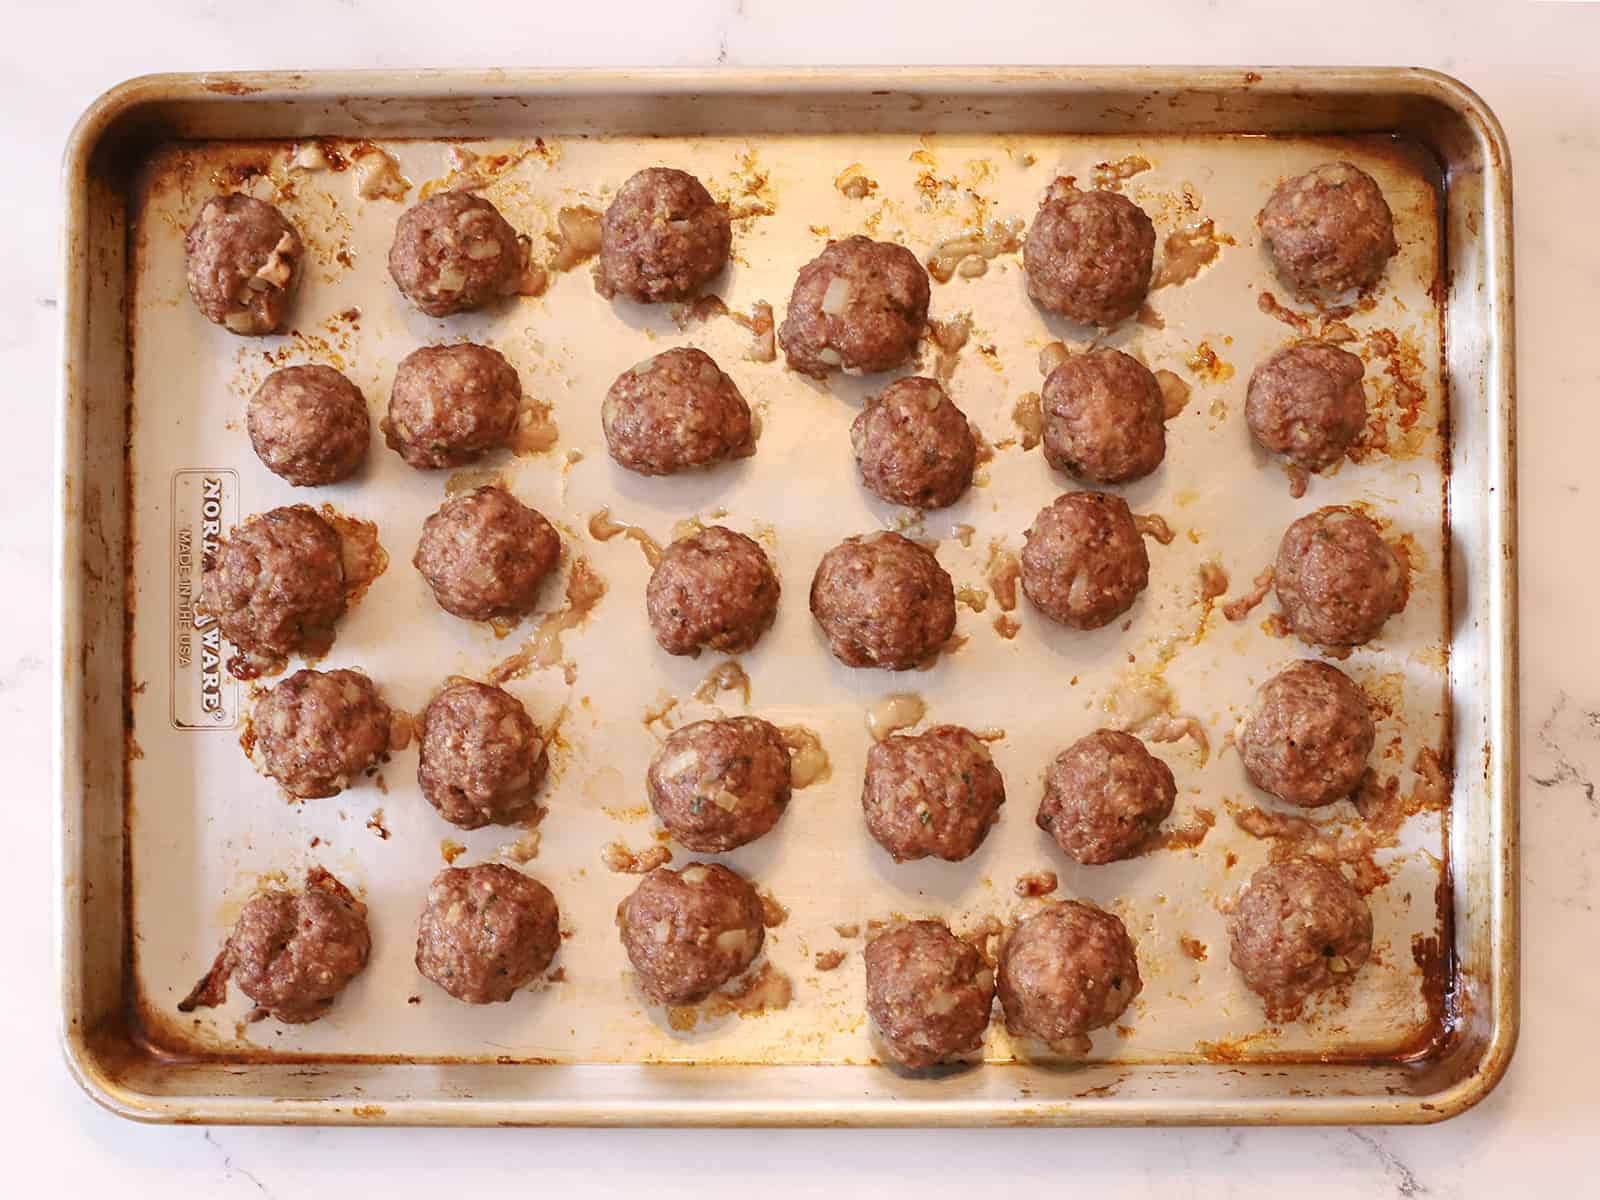 Cooked meatballs out of the oven.